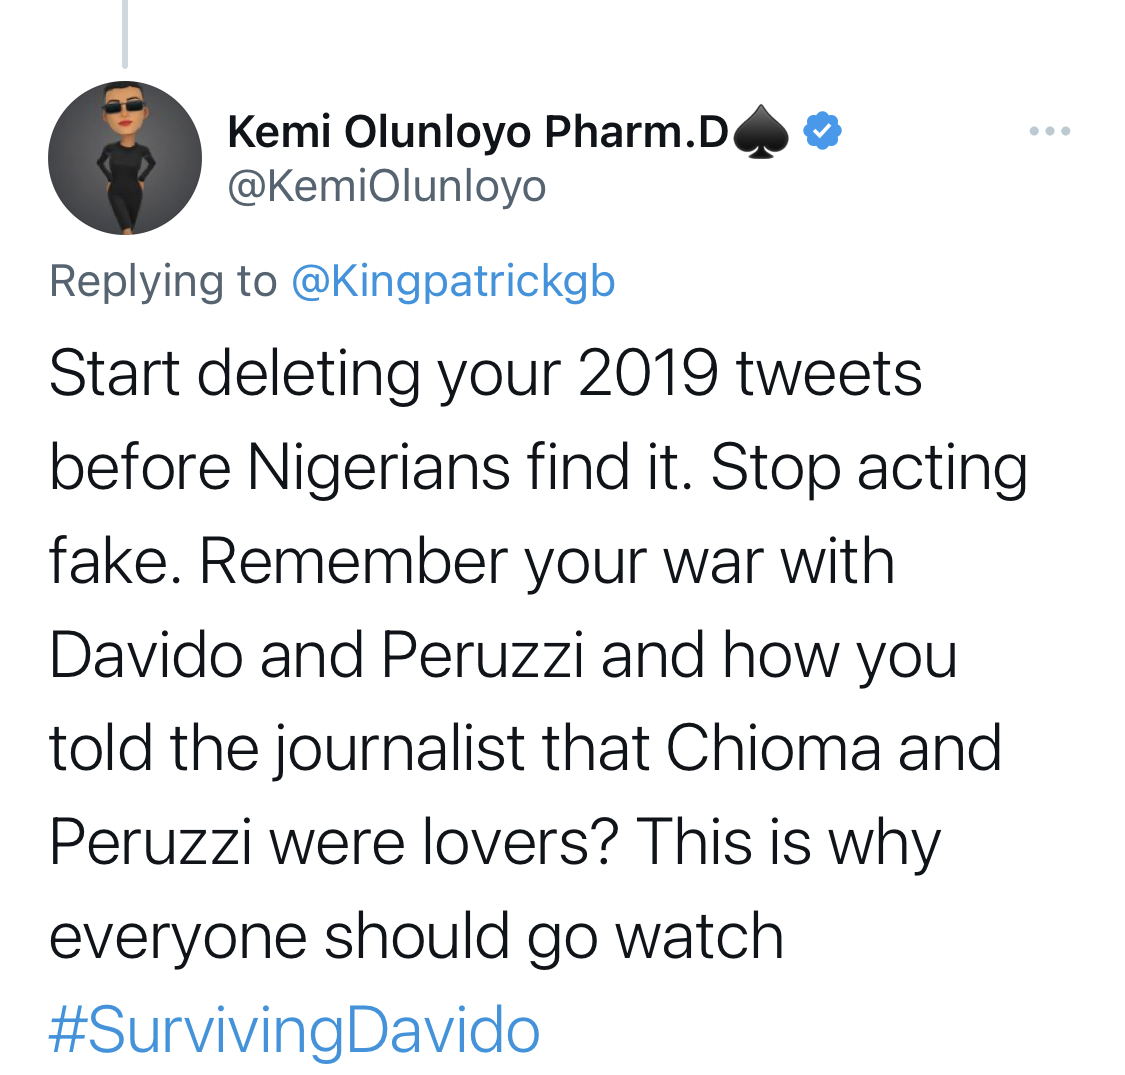 Golden Boy CEO Patrick finally breaks silence on possession of Peruzzi and Chioma sextape